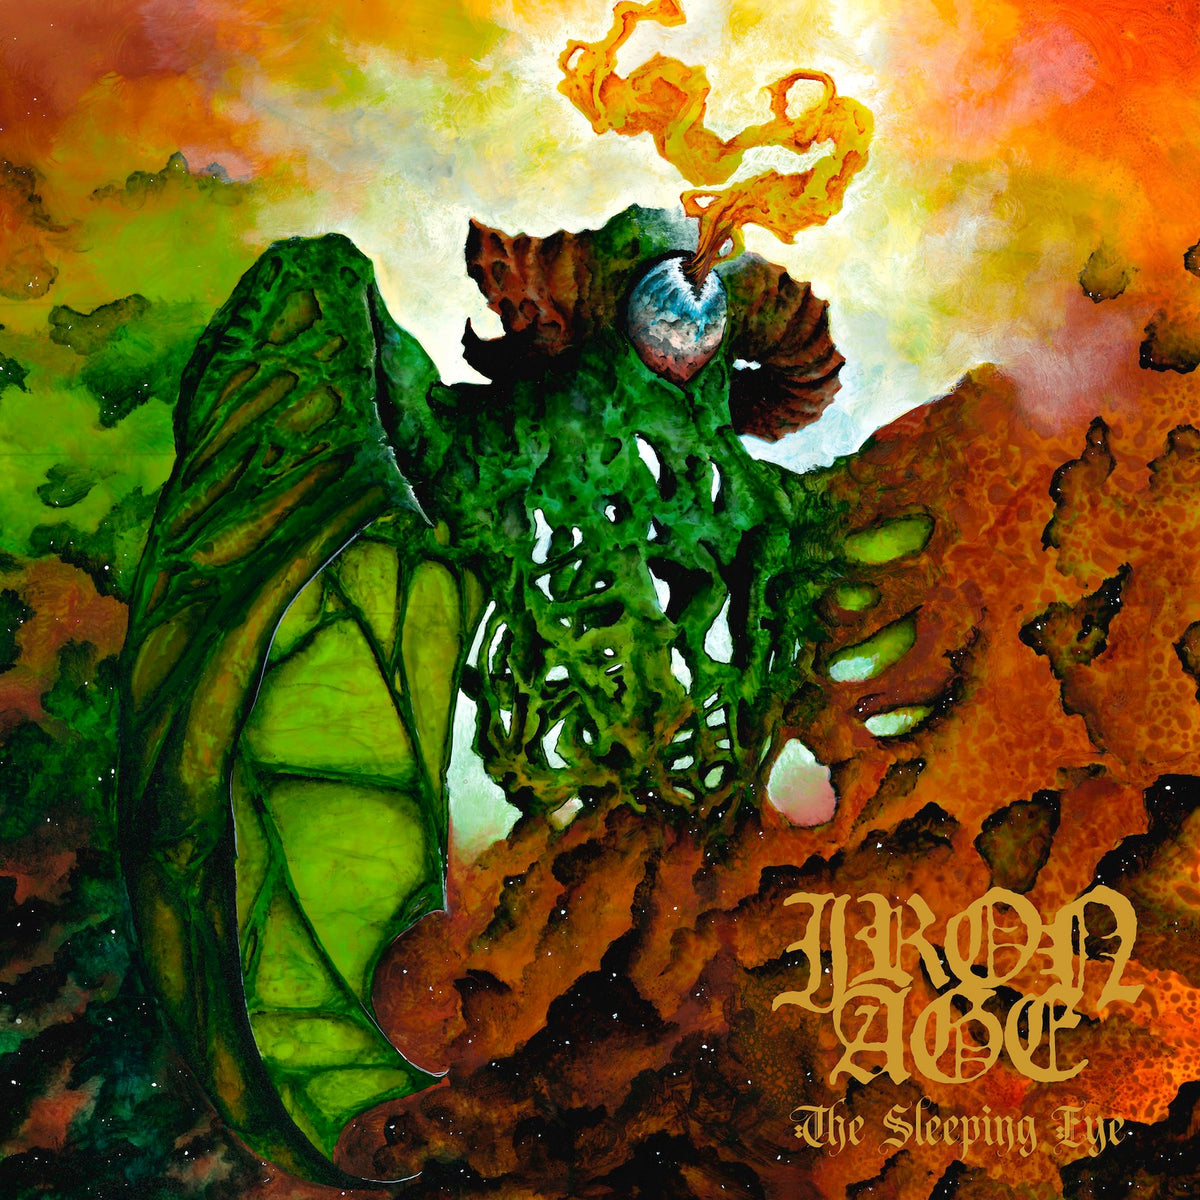 [SOLD OUT] IRON AGE "The Sleeping Eye" CD [Eternal Champion]